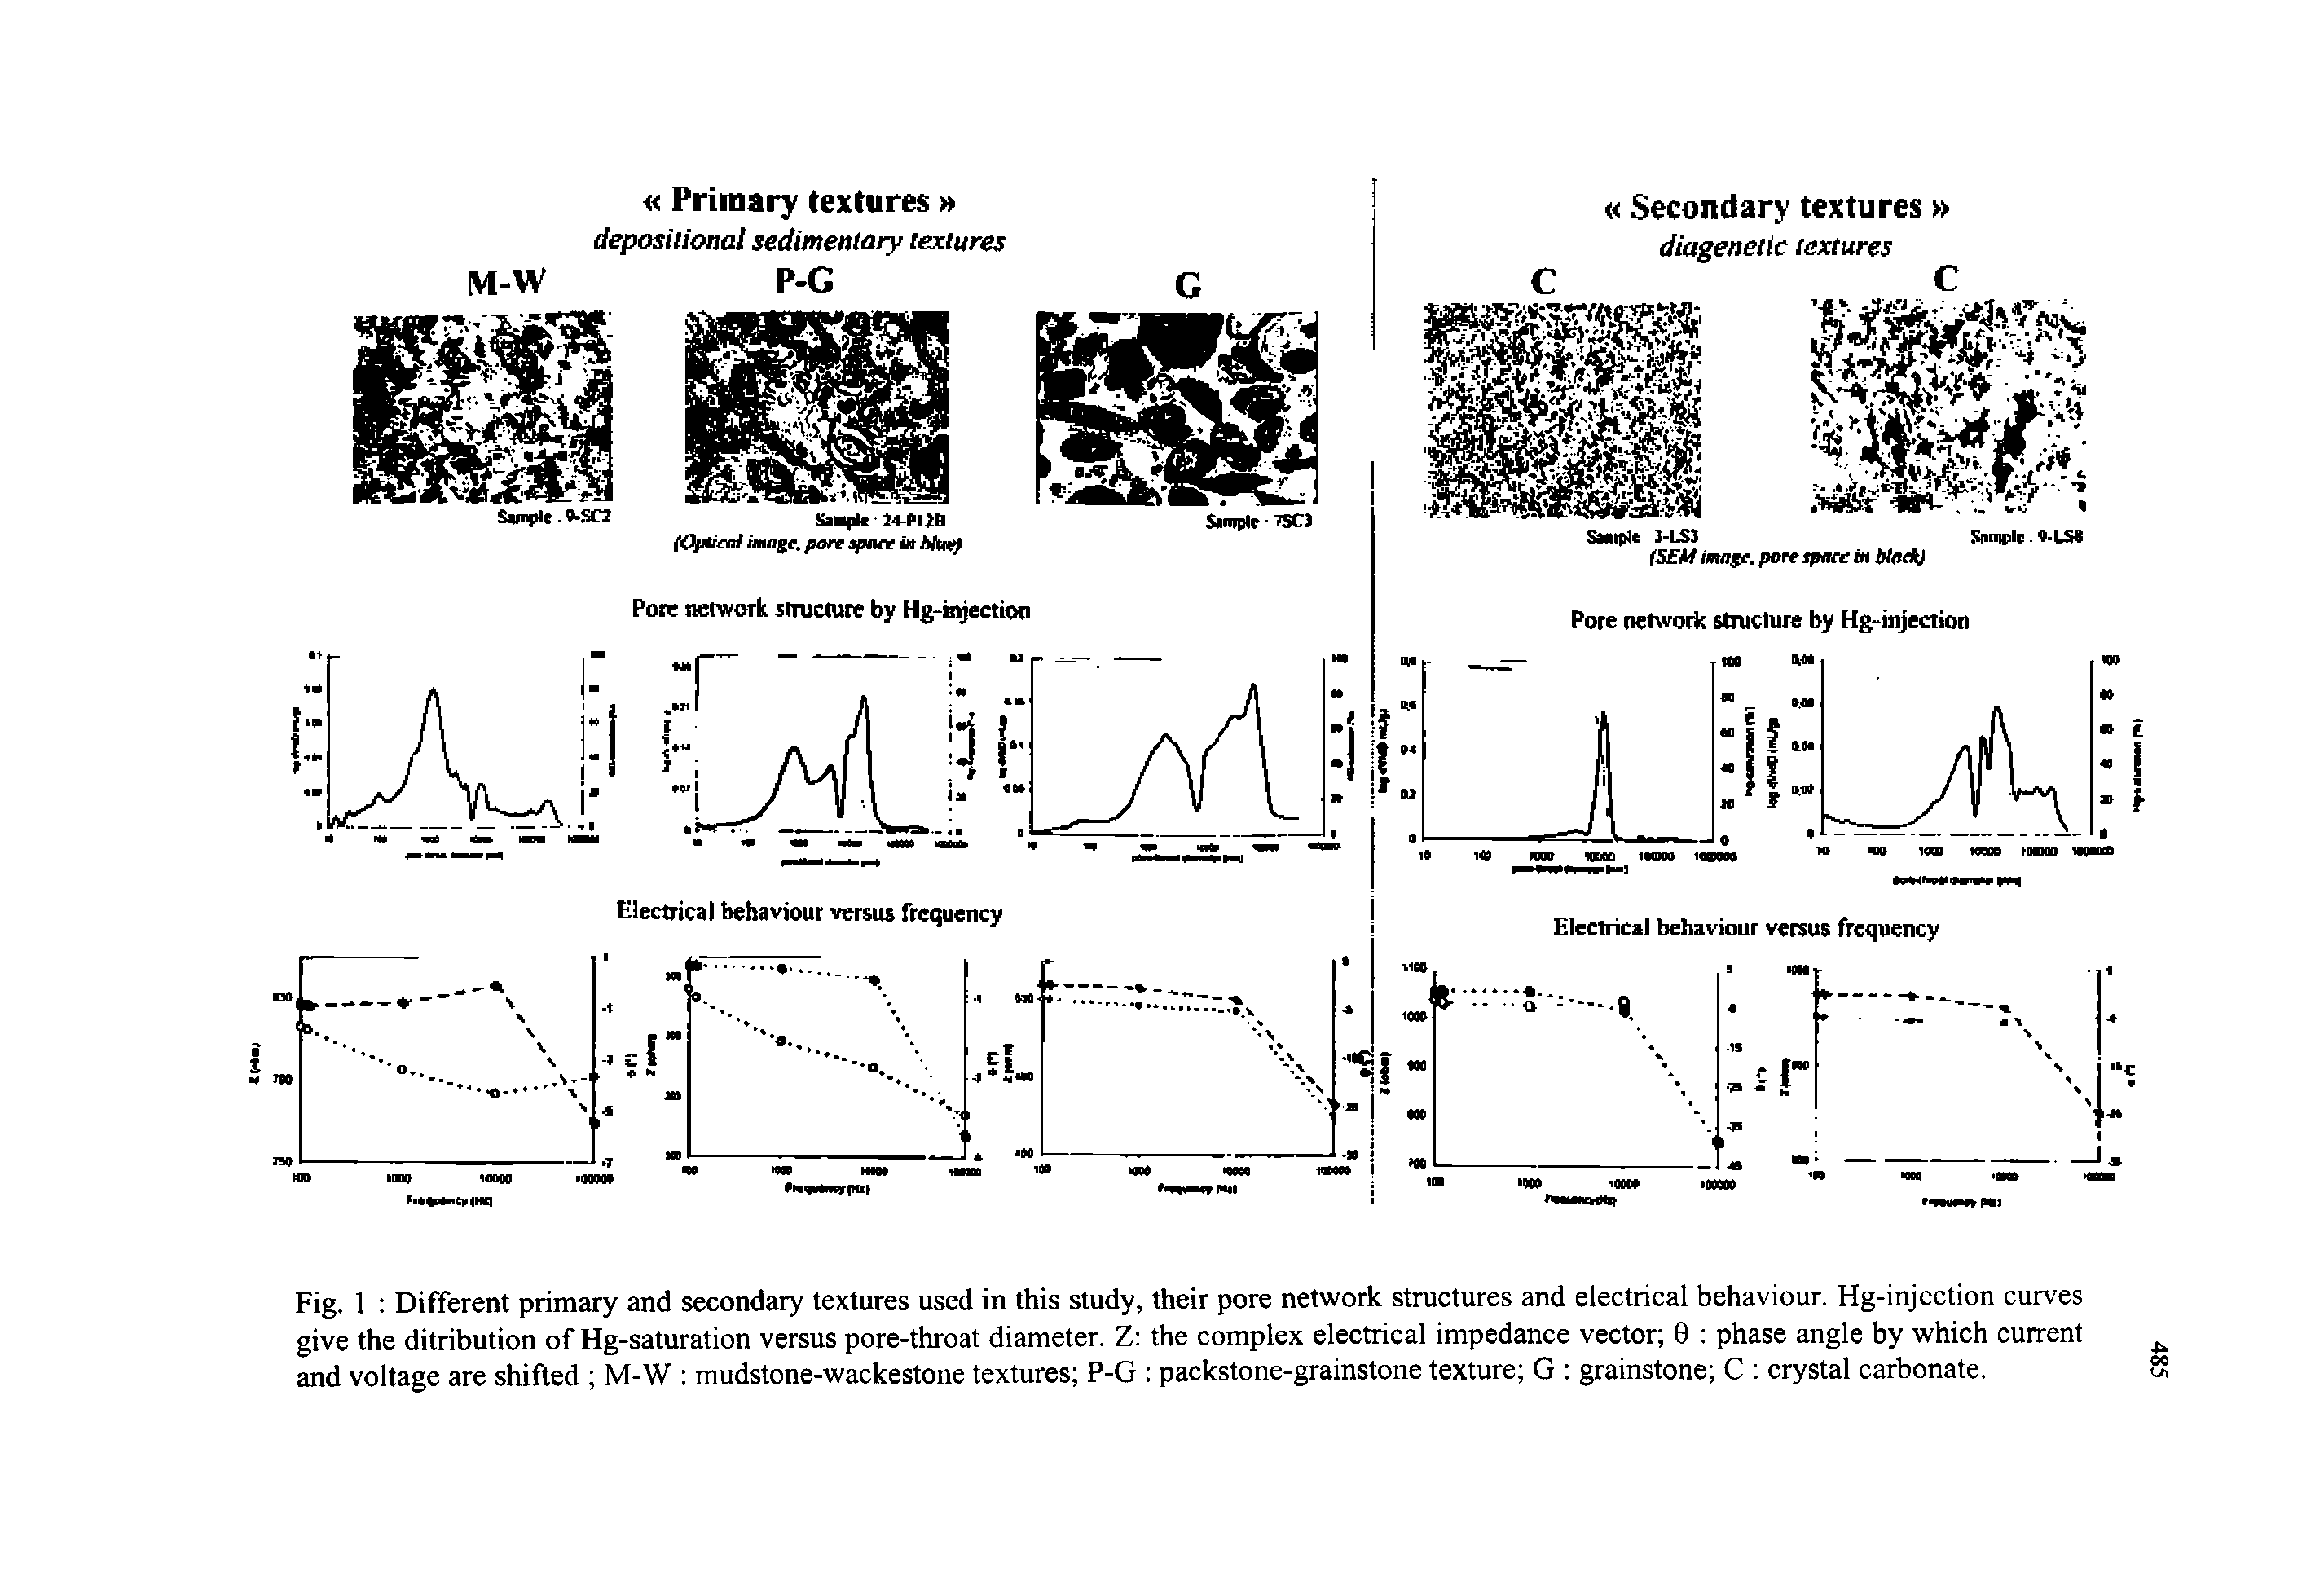 Fig. 1 Different primary and secondary textures used in this study, their pore network structures and electrical behaviour. Hg-injection curves give the ditribution of Hg-saturation versus pore-throat diameter. Z the complex electrical impedance vector 9 phase angle by which current and voltage are shifted M-W mudstone-wackestone textures P-G packstone-grainstone texture G grainstone C crystal carbonate.